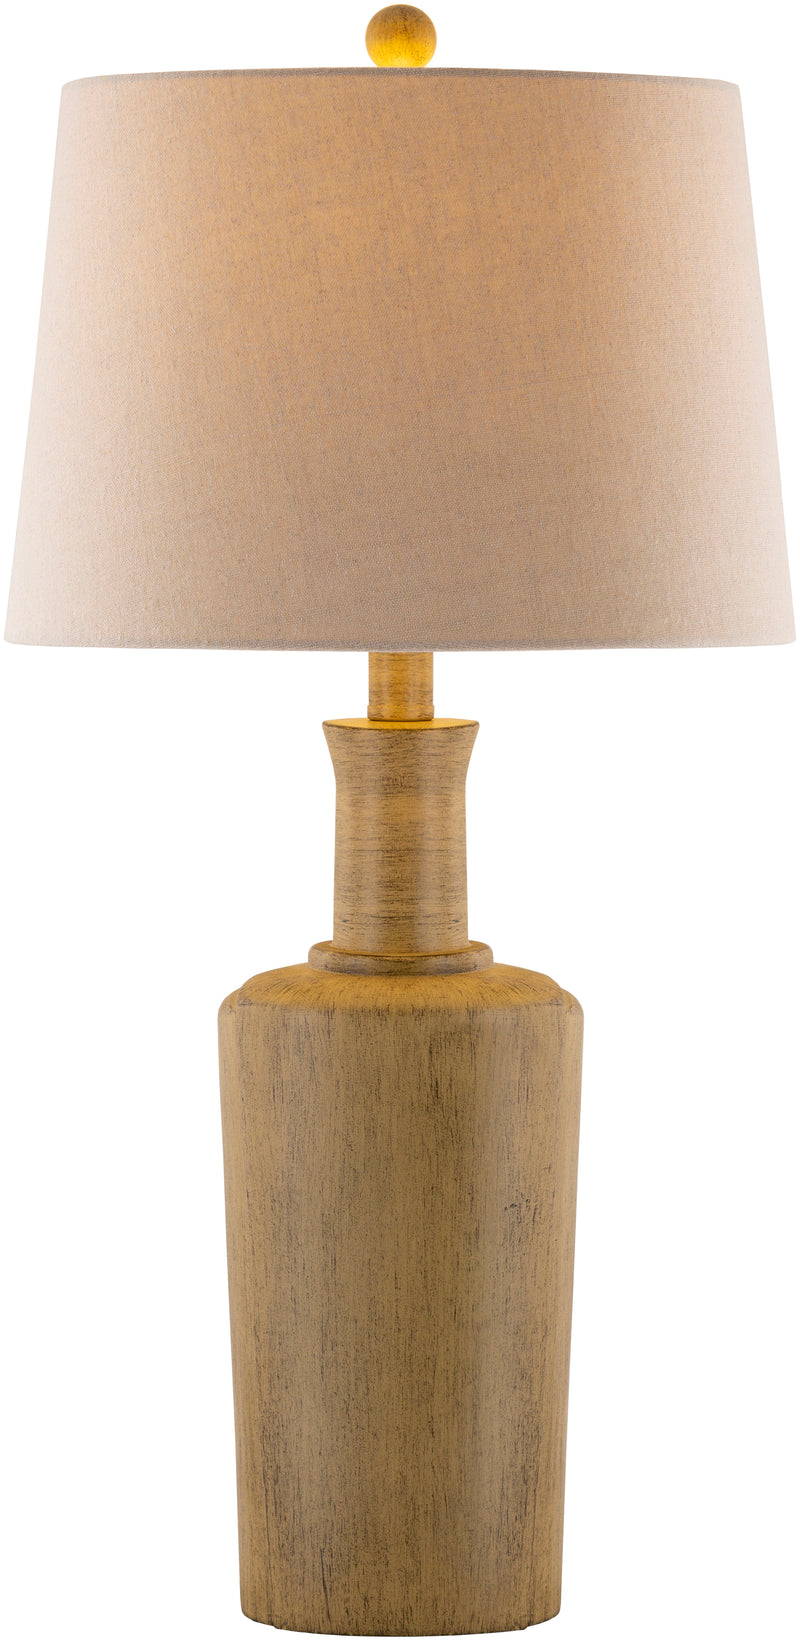 media image for Capitan CPI-001 Table Lamp in Tan & Natural by Surya 285